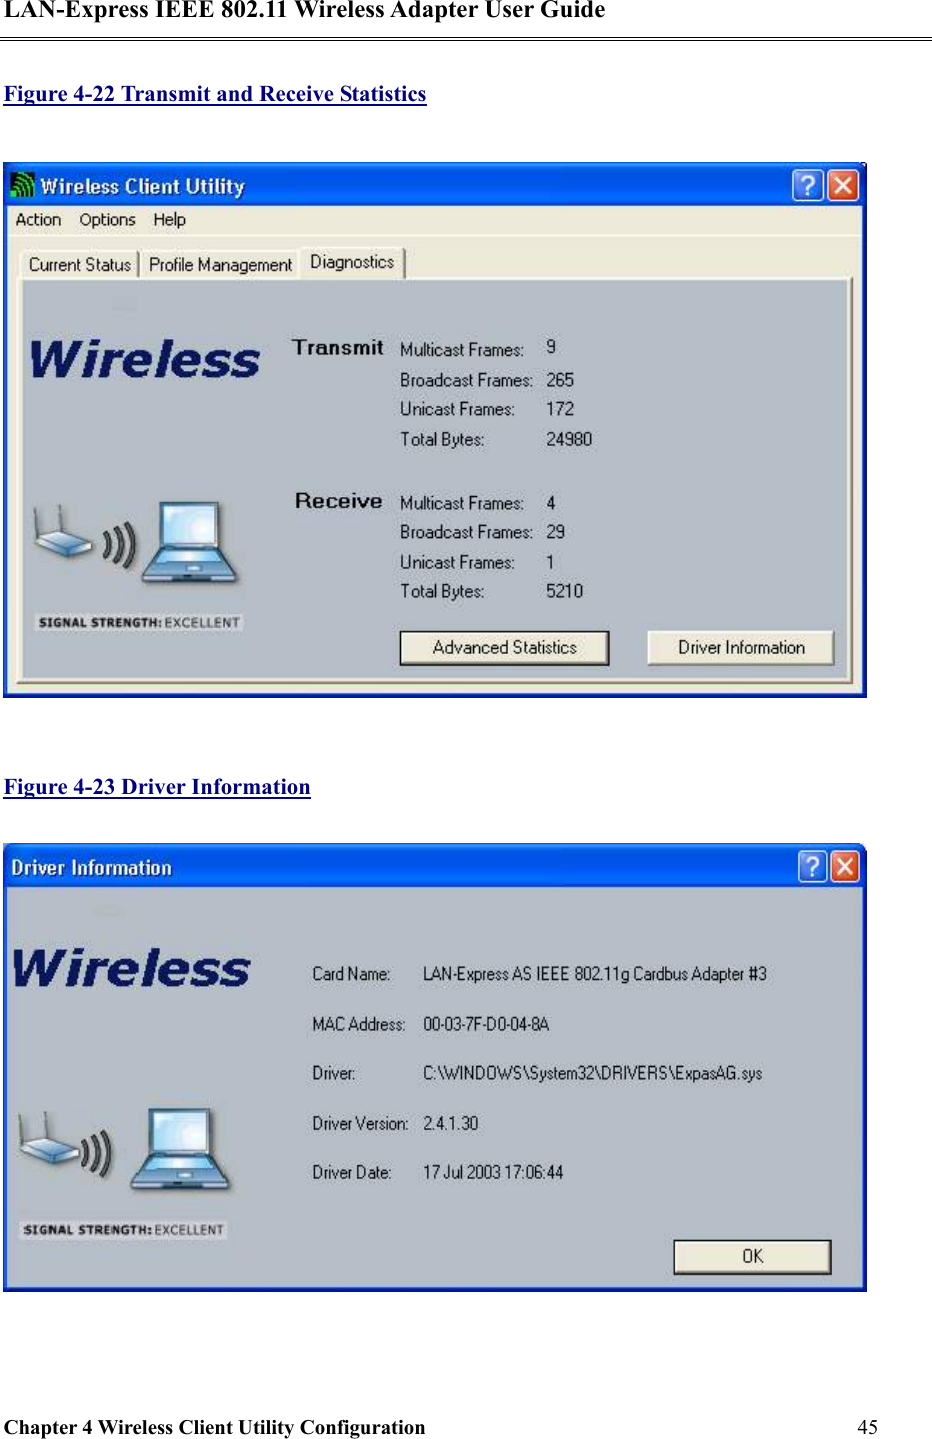 LAN-Express IEEE 802.11 Wireless Adapter User Guide Chapter 4 Wireless Client Utility Configuration   45  Figure 4-22 Transmit and Receive Statistics   Figure 4-23 Driver Information   